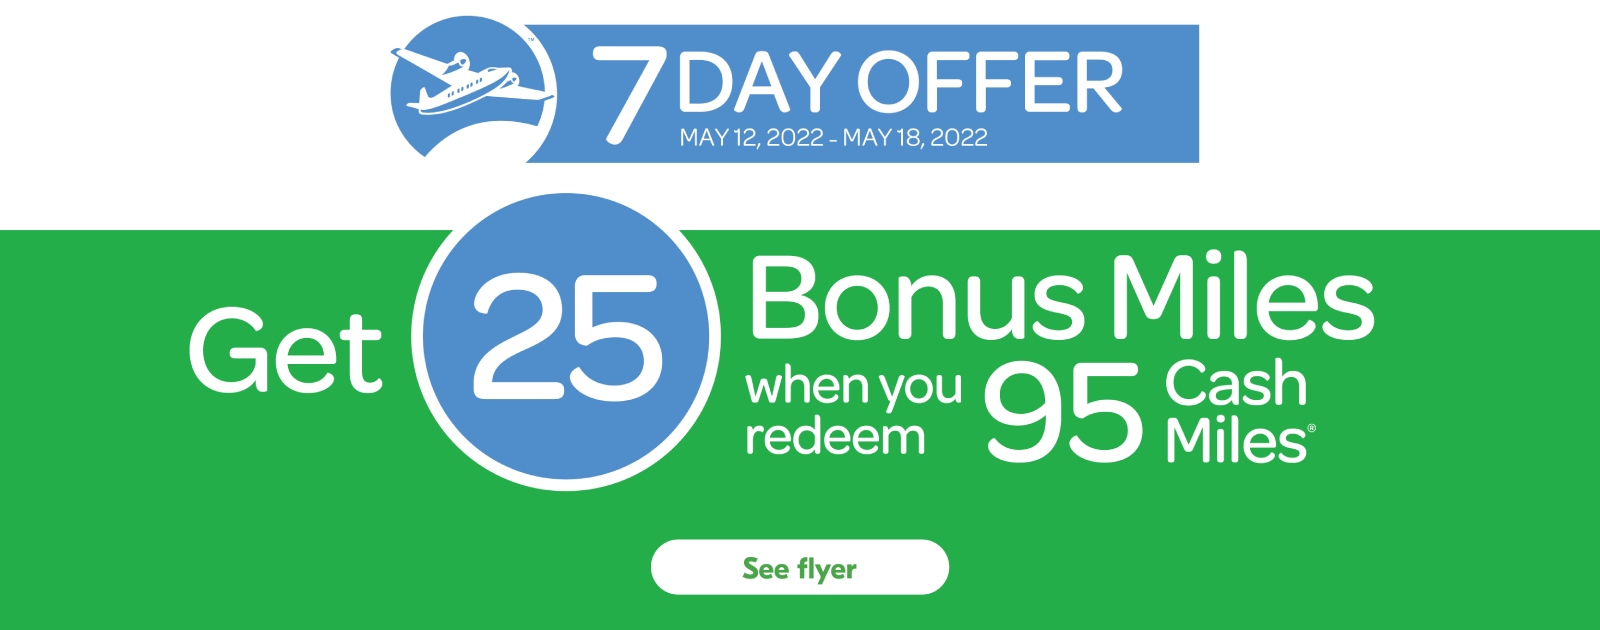 Text Reading 'Get 25 Bonus Miles when you redeem 95 Cash Miles. Offer valid from May 12 to May 18th, 2022. 'See flyer' for more information.'